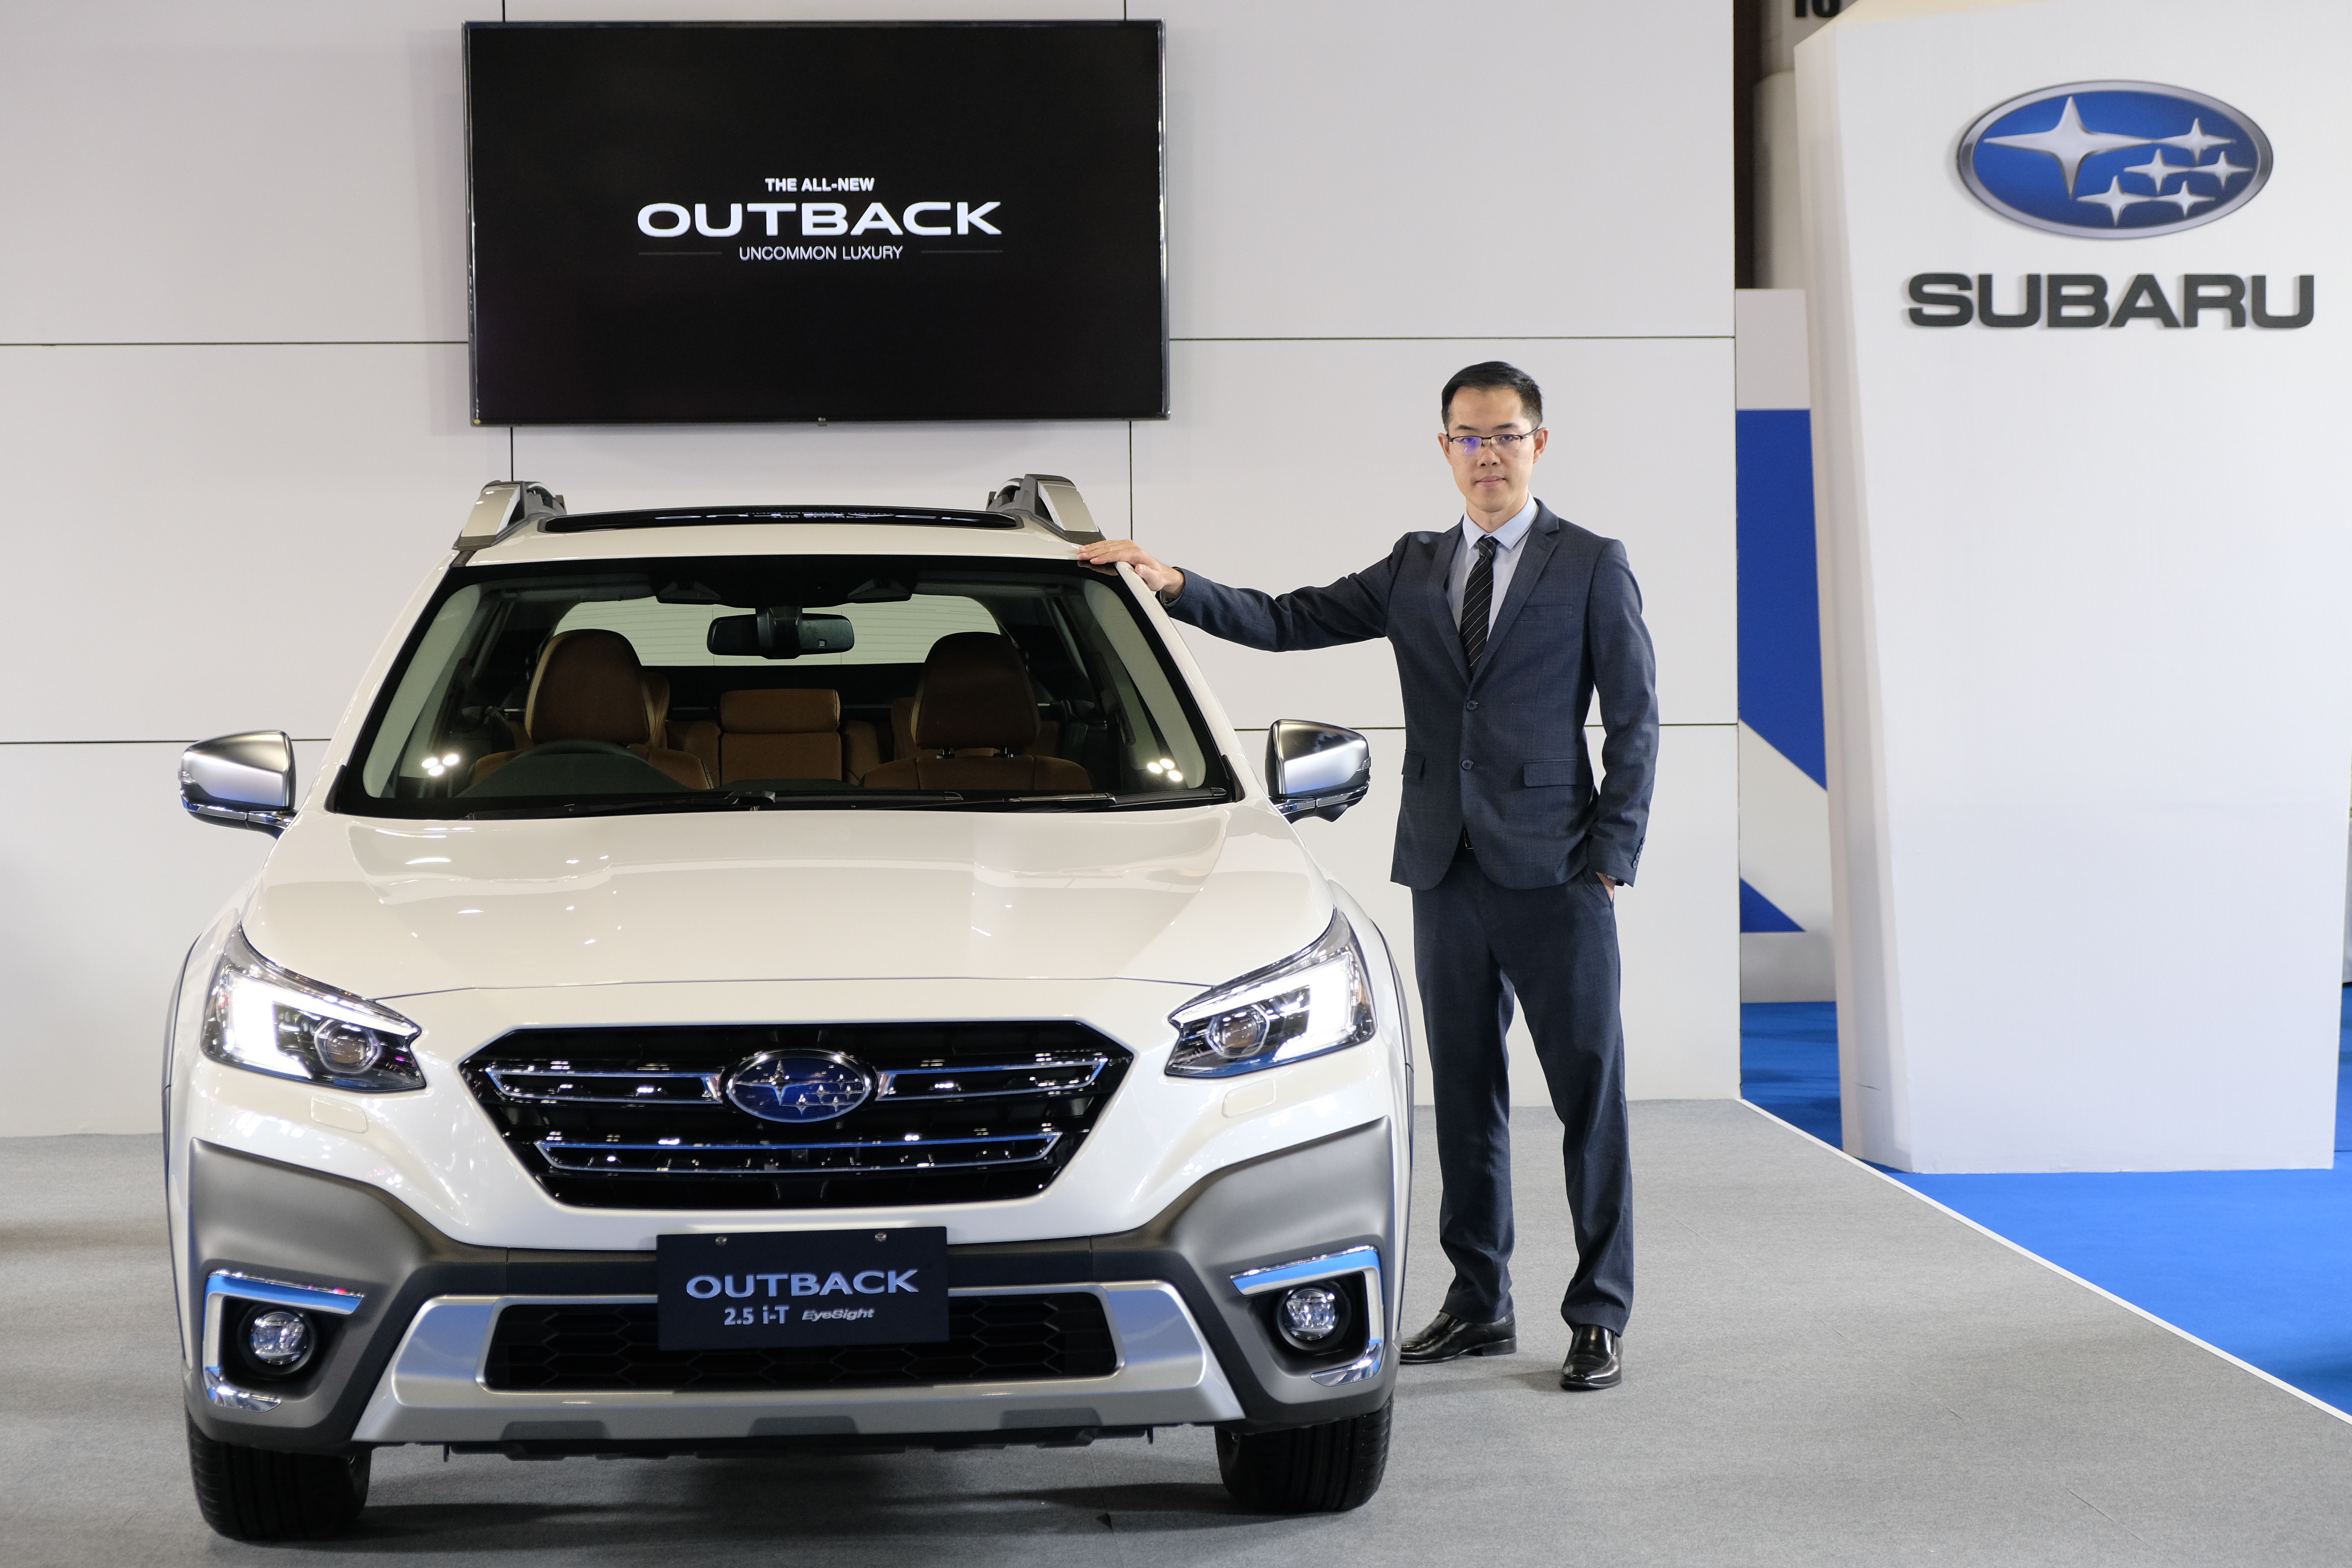 The All-New OUTBACK ปรากฏตัวครั้งแรกในอาเซียน